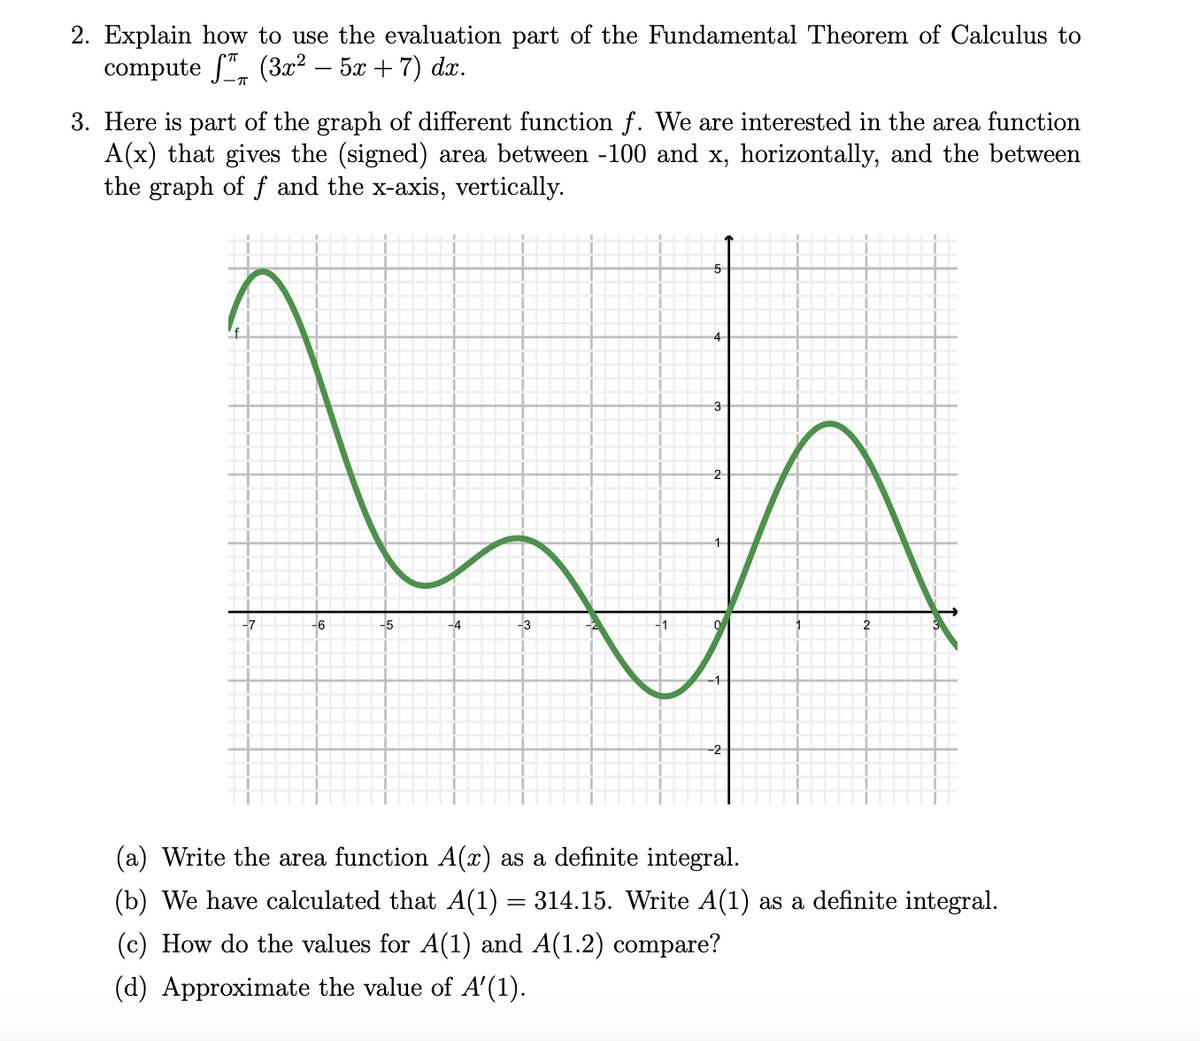 2. Explain how to use the evaluation part of the Fundamental Theorem of Calculus to
compute S", (3x² – 5x + 7) dx.
-
3. Here is part of the graph of different function f. We are interested in the area function
A(x) that gives the (signed) area between -100 and x, horizontally, and the between
the graph of f and the x-axis, vertically.
4
3
-7
-6
-5
-4
-3
2
-1
-2
(a) Write the area function A(x) as a definite integral.
(b) We have calculated that A(1) = 314.15. Write A(1) as a definite integral.
(c) How do the values for A(1) and A(1.2) compare?
(d) Approximate the value of A'(1).
